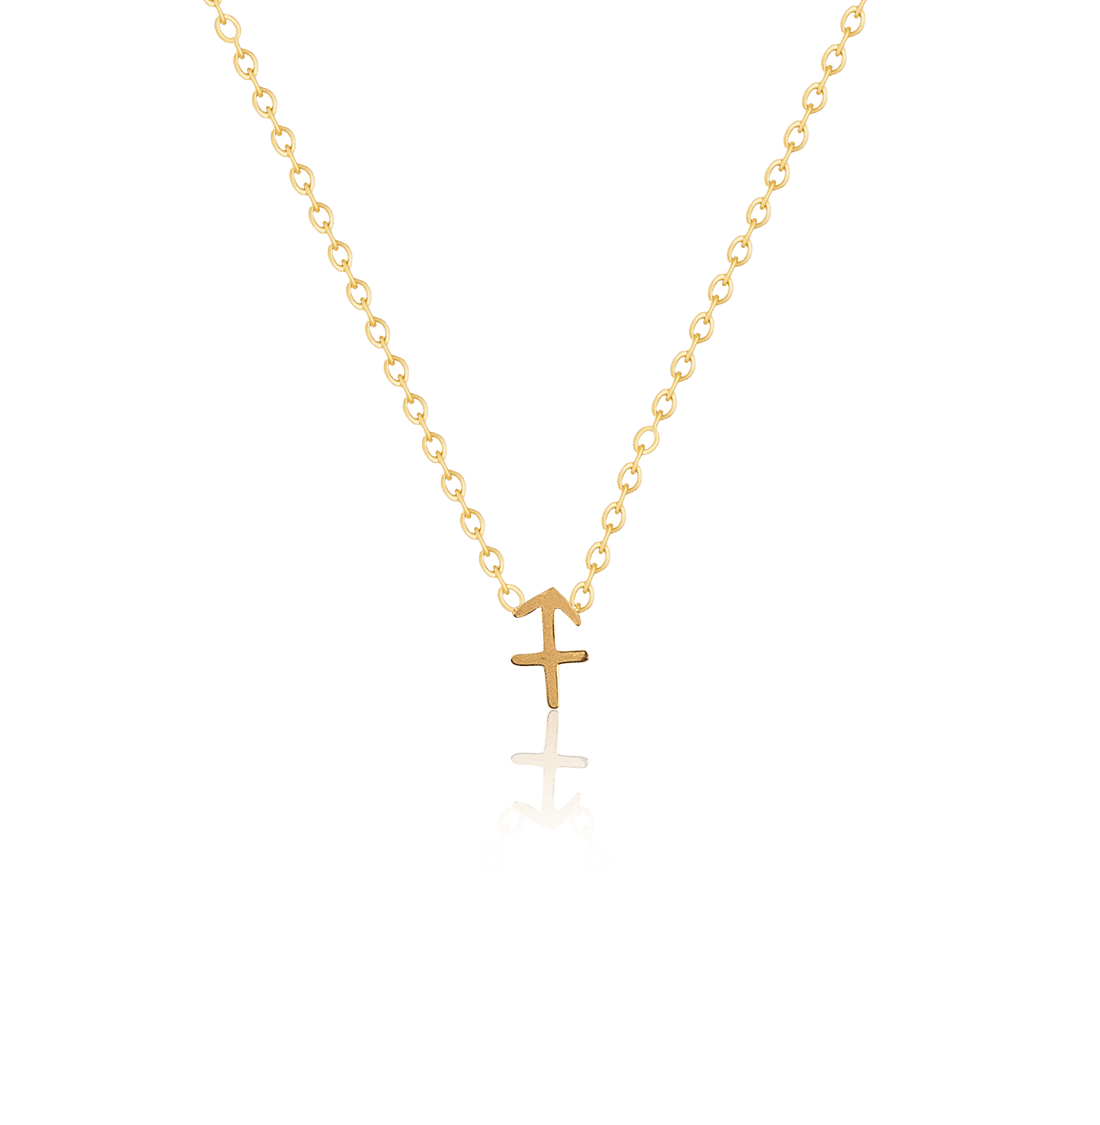 bianco rosso Necklaces Gold Sagittarius - Necklace cyprus greece jewelry gift free shipping europe worldwide